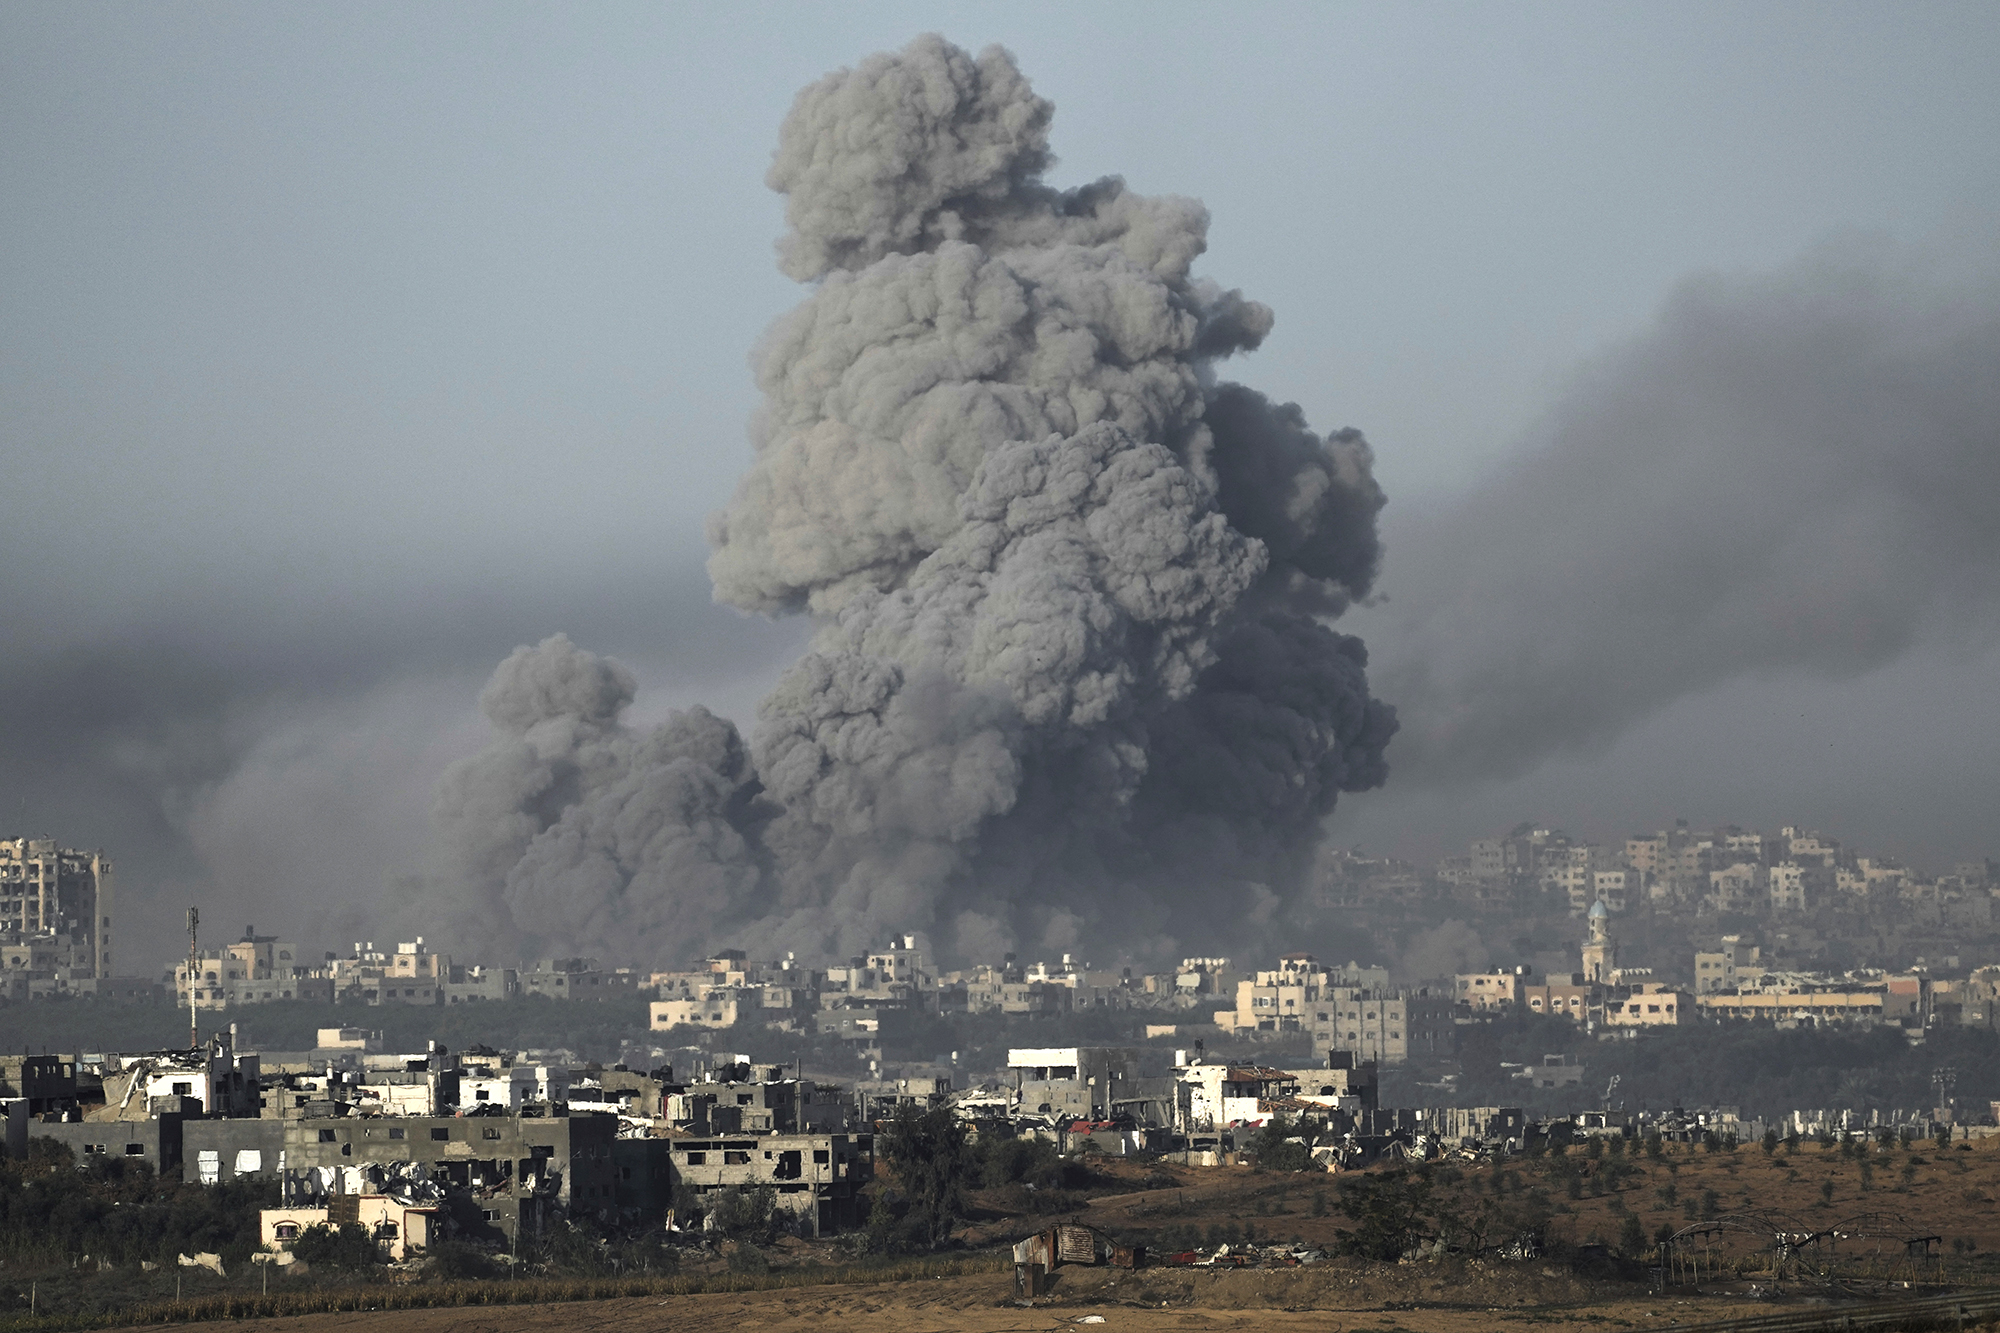 Deaths and attacks in Gaza, news and more